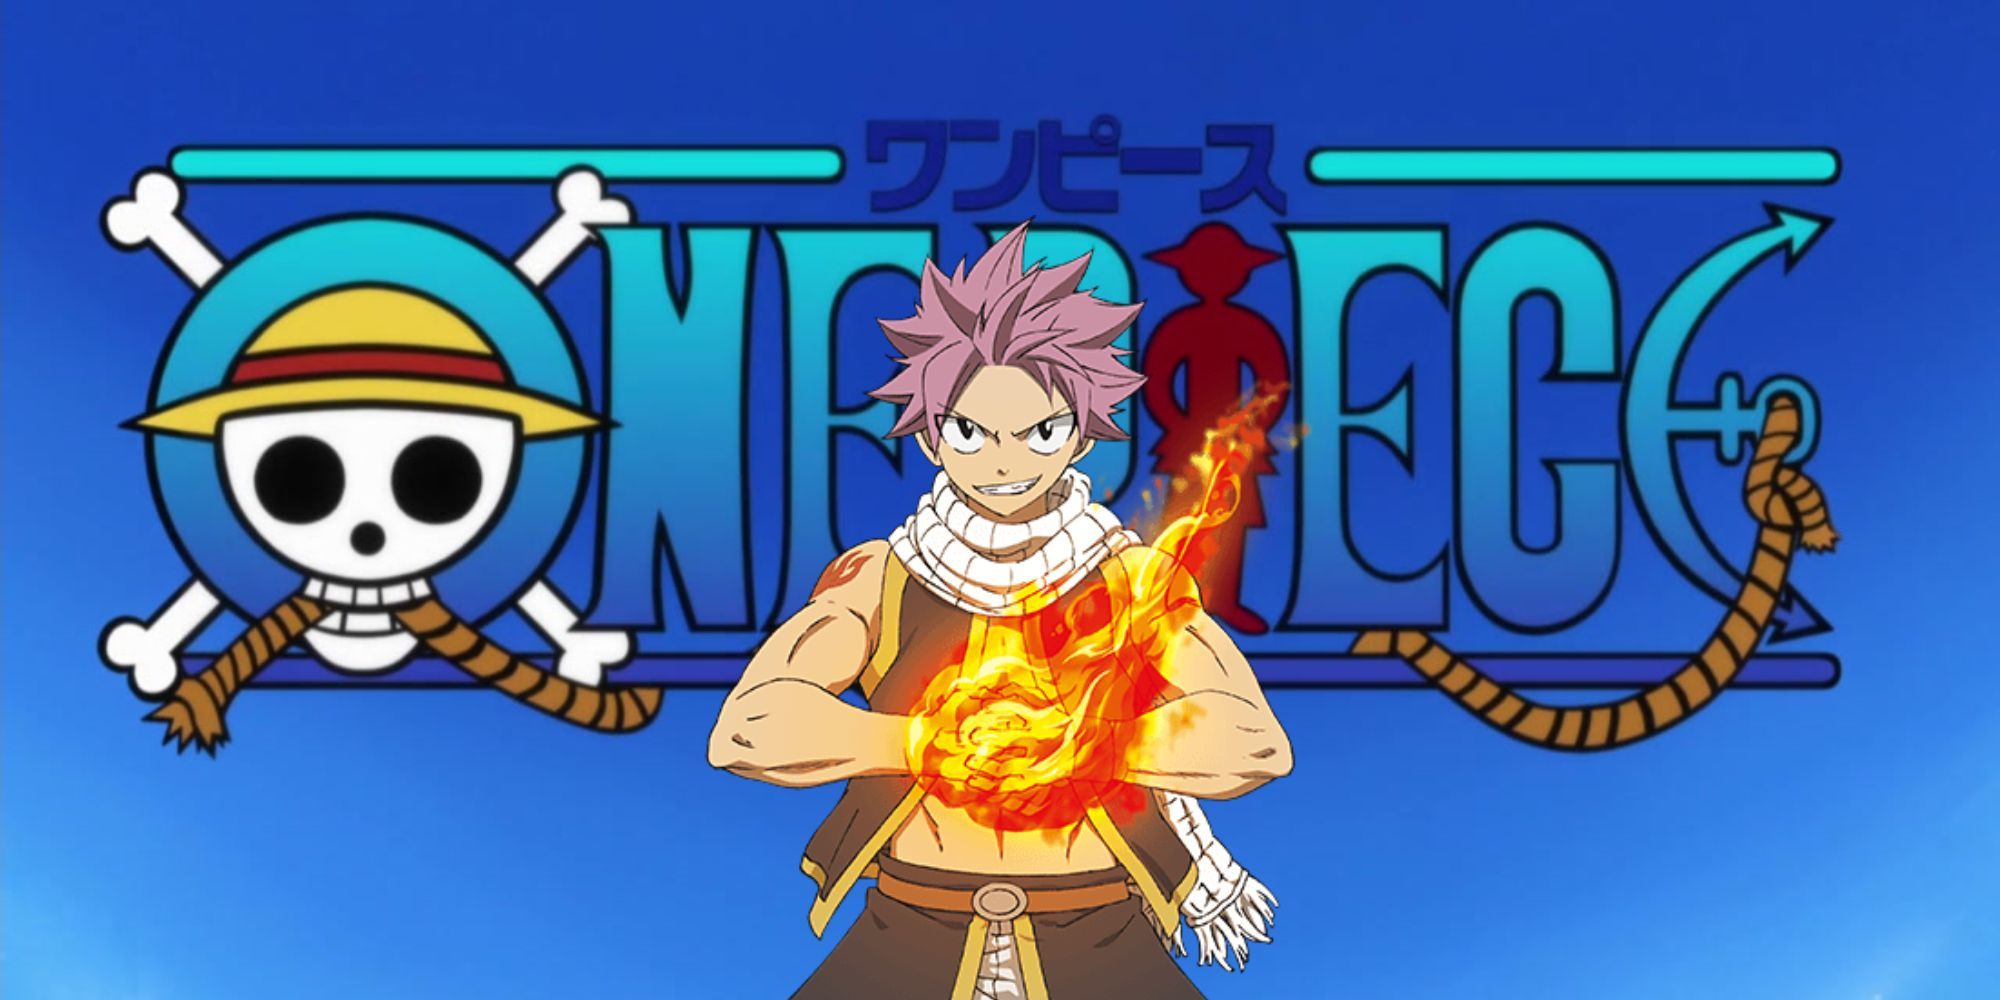 Is Fairy Tail inspired by One Piece? - One Piece